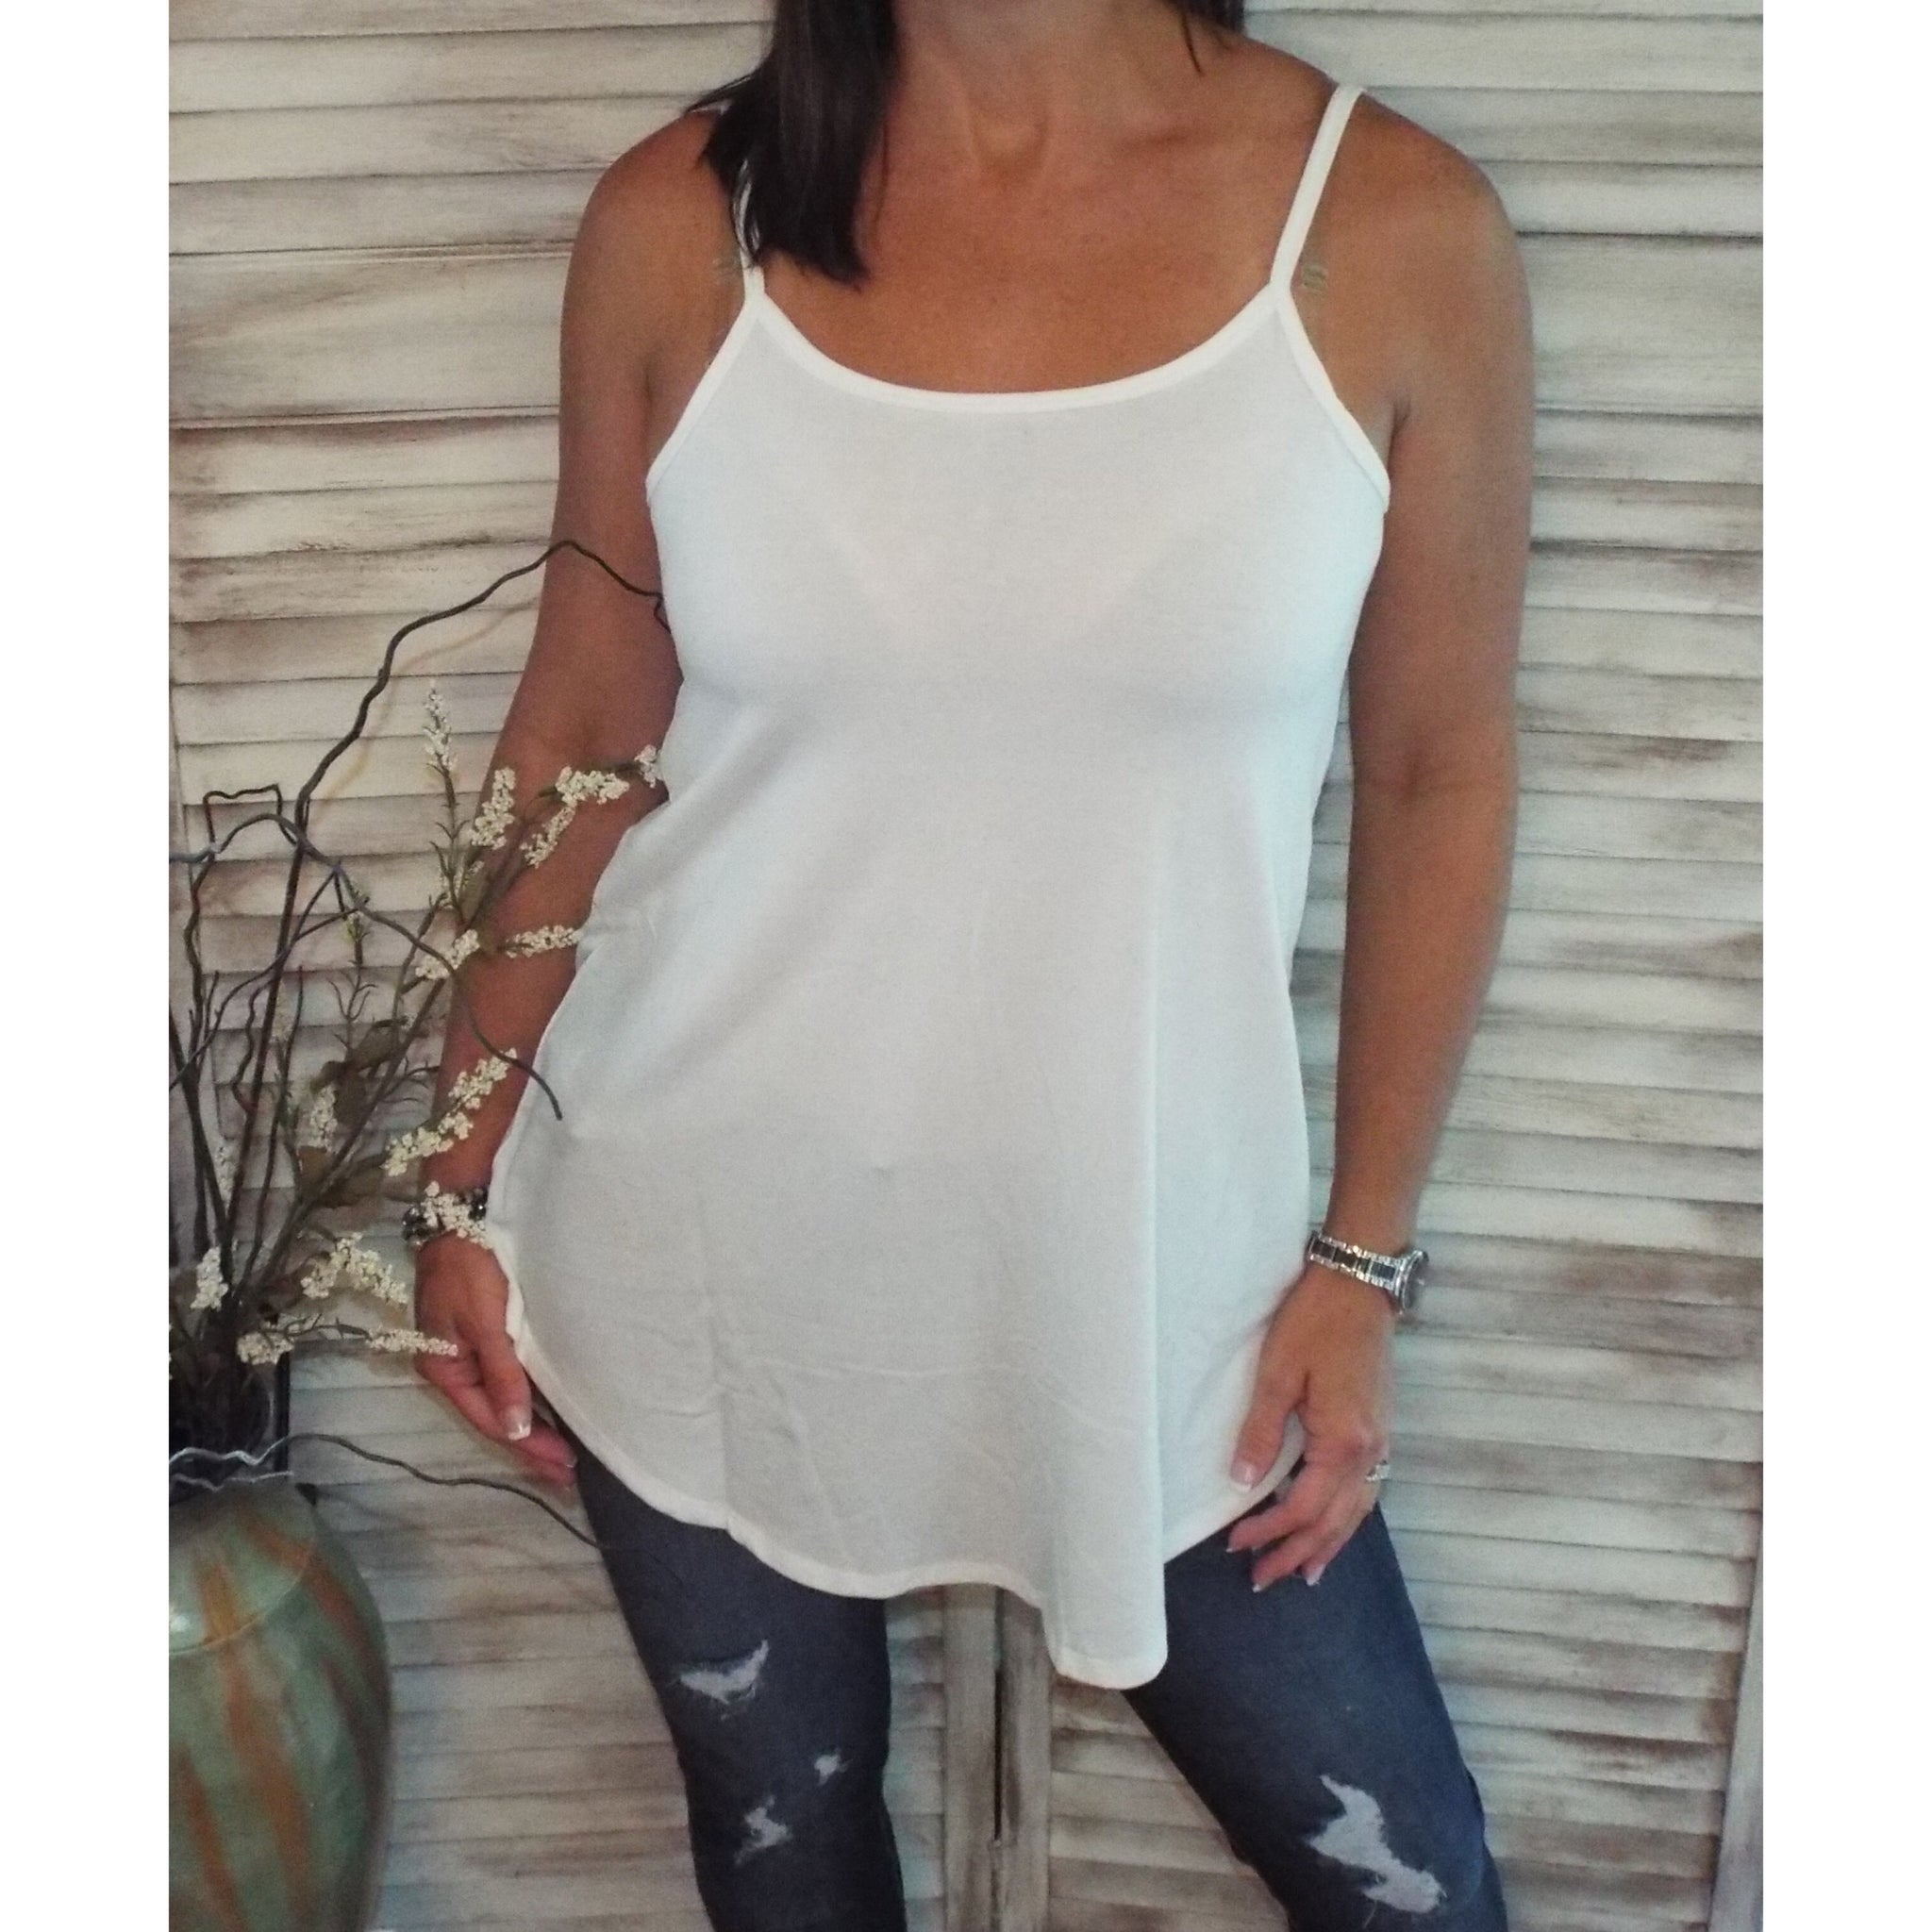 “Heat Wave” Reversible Front Back Low Scoop Or V-Neck Tank Shirt Top Ivory S/M/L/XL